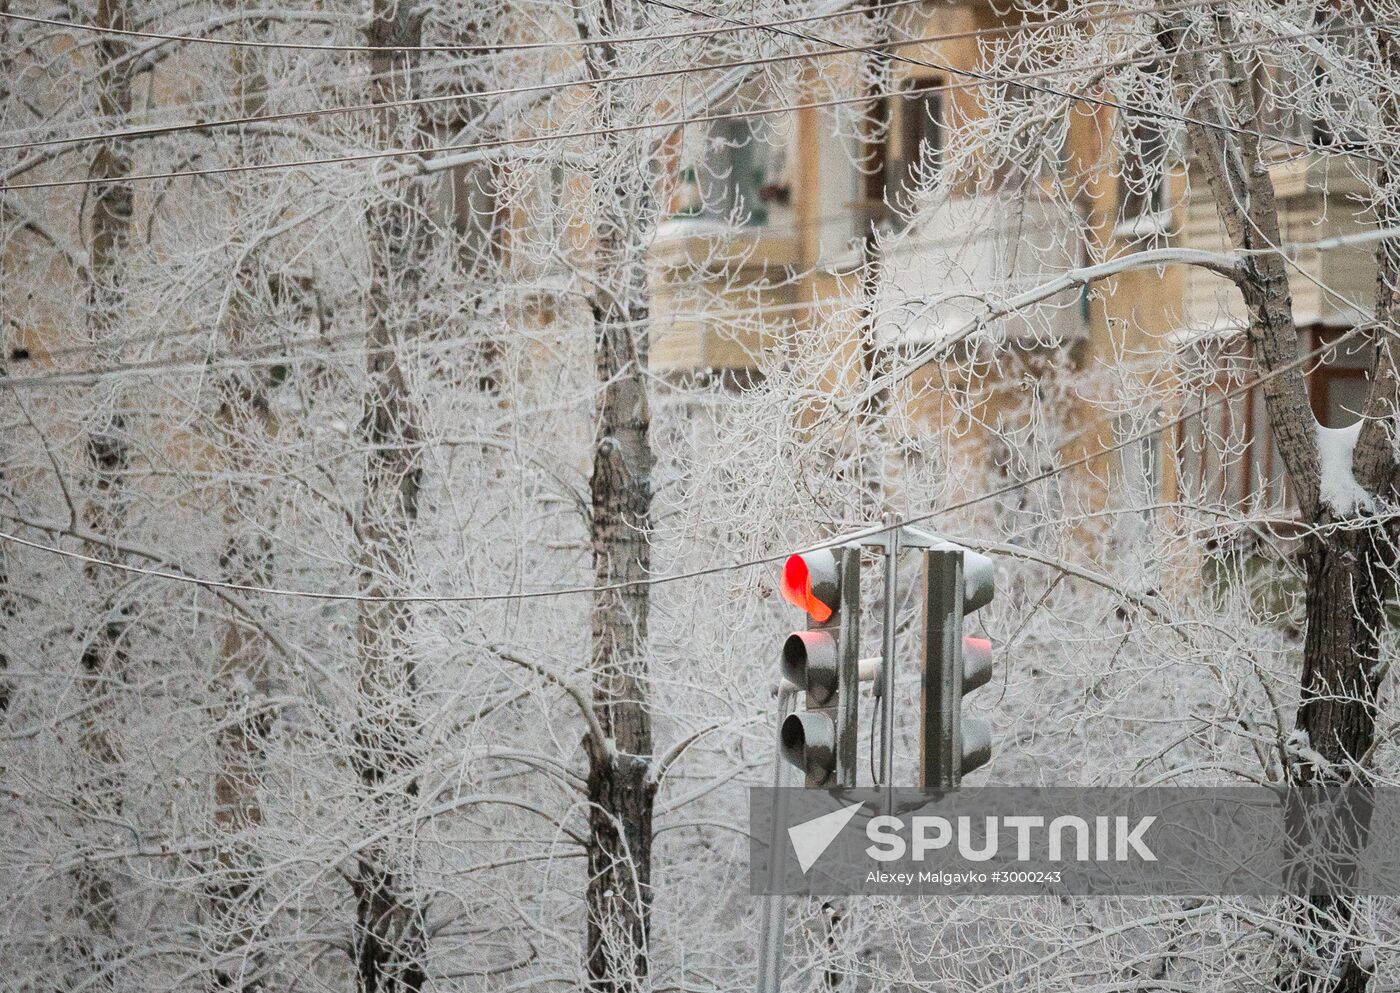 Unusial freeze-up in Omsk